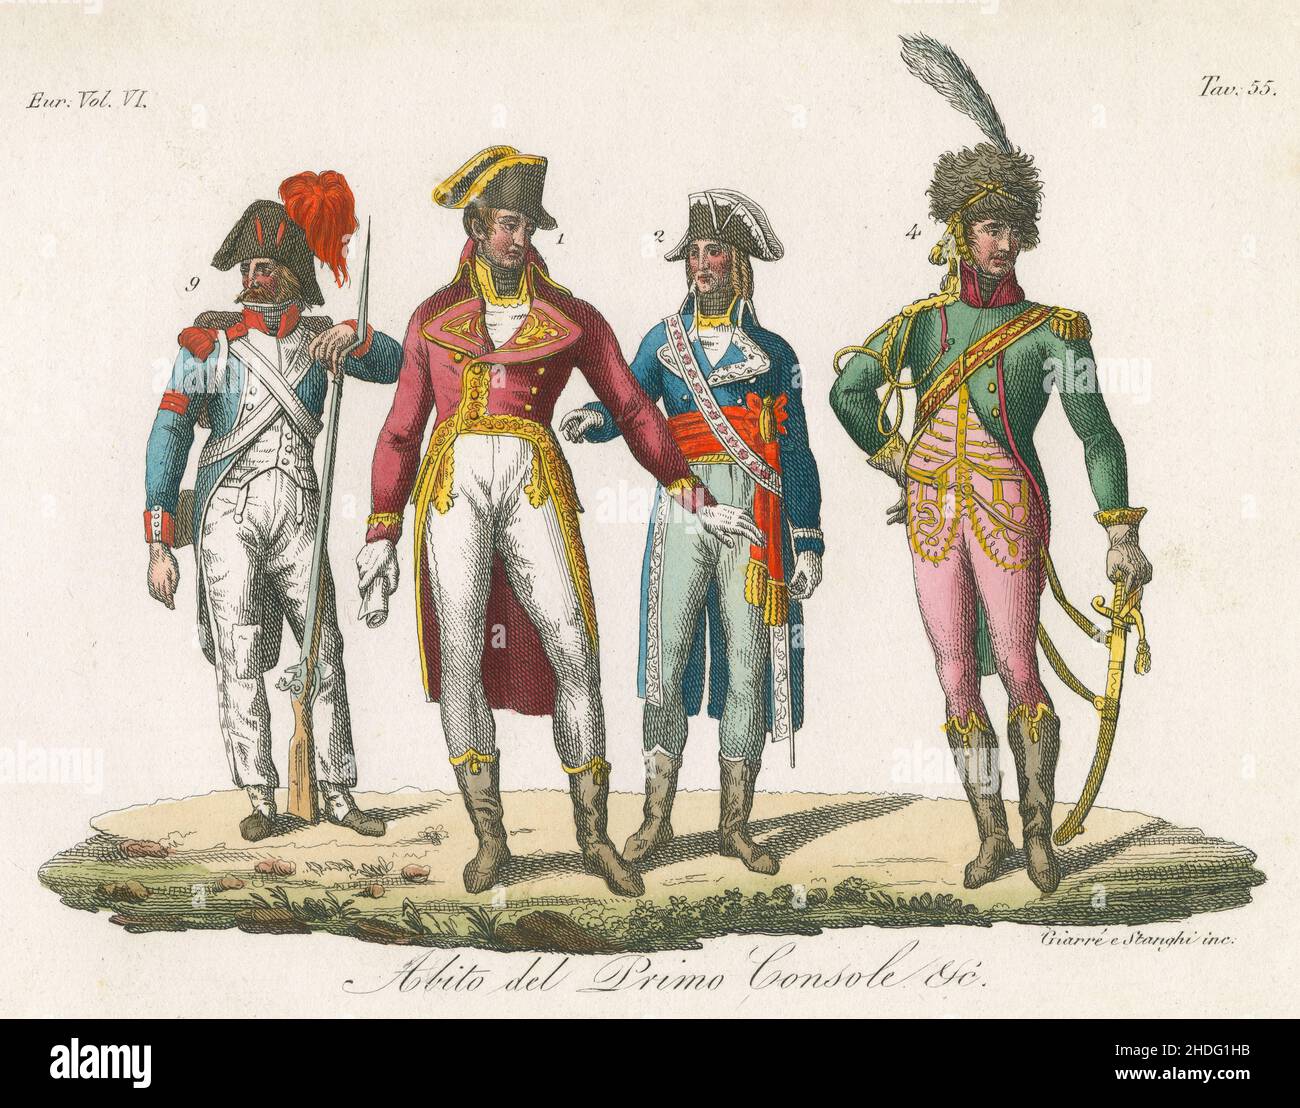 Antique c1830 hand-tinted engraving, 18th century French royal fashion with Napoleon Bonaparte, as First Consul (Premier consul) and others. Published by Giulio Ferrario. SOURCE: ORIGINAL ENGRAVING Stock Photo